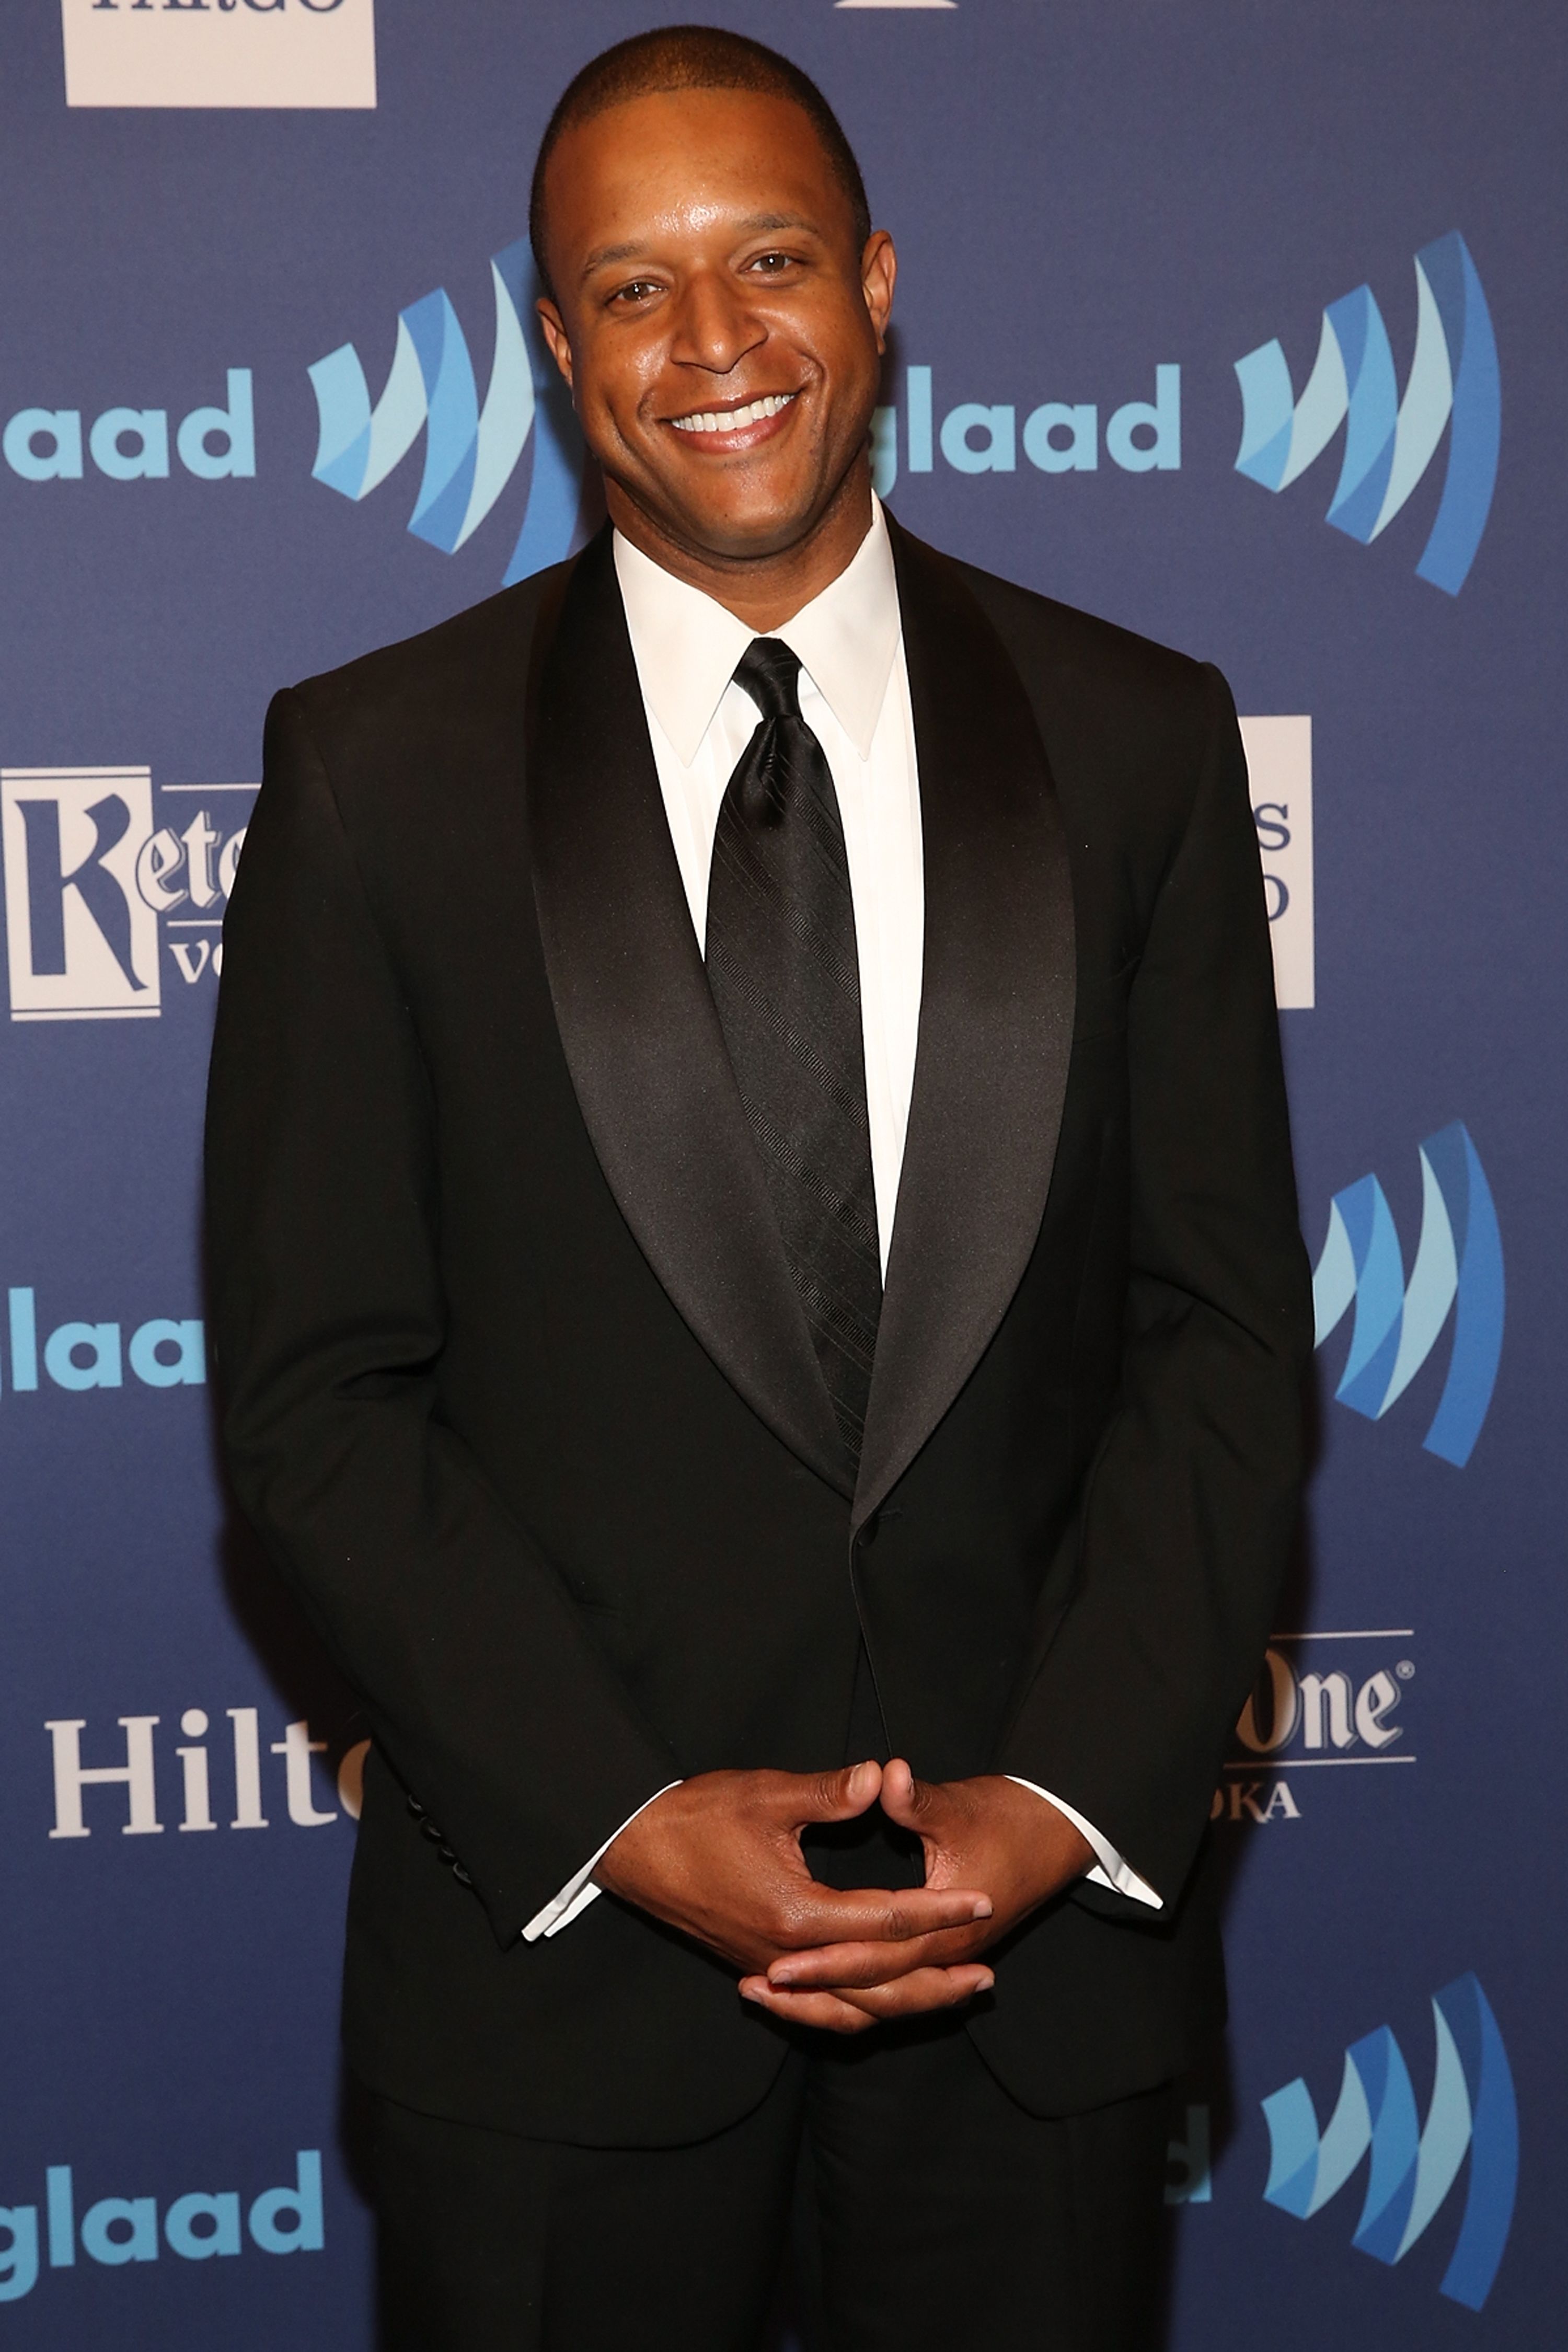 Craig Melvin attends the 26th Annual GLAAD Media Awards at The Waldorf Astoria on May 9, 2015 in New York City. | Photo: Getty Images